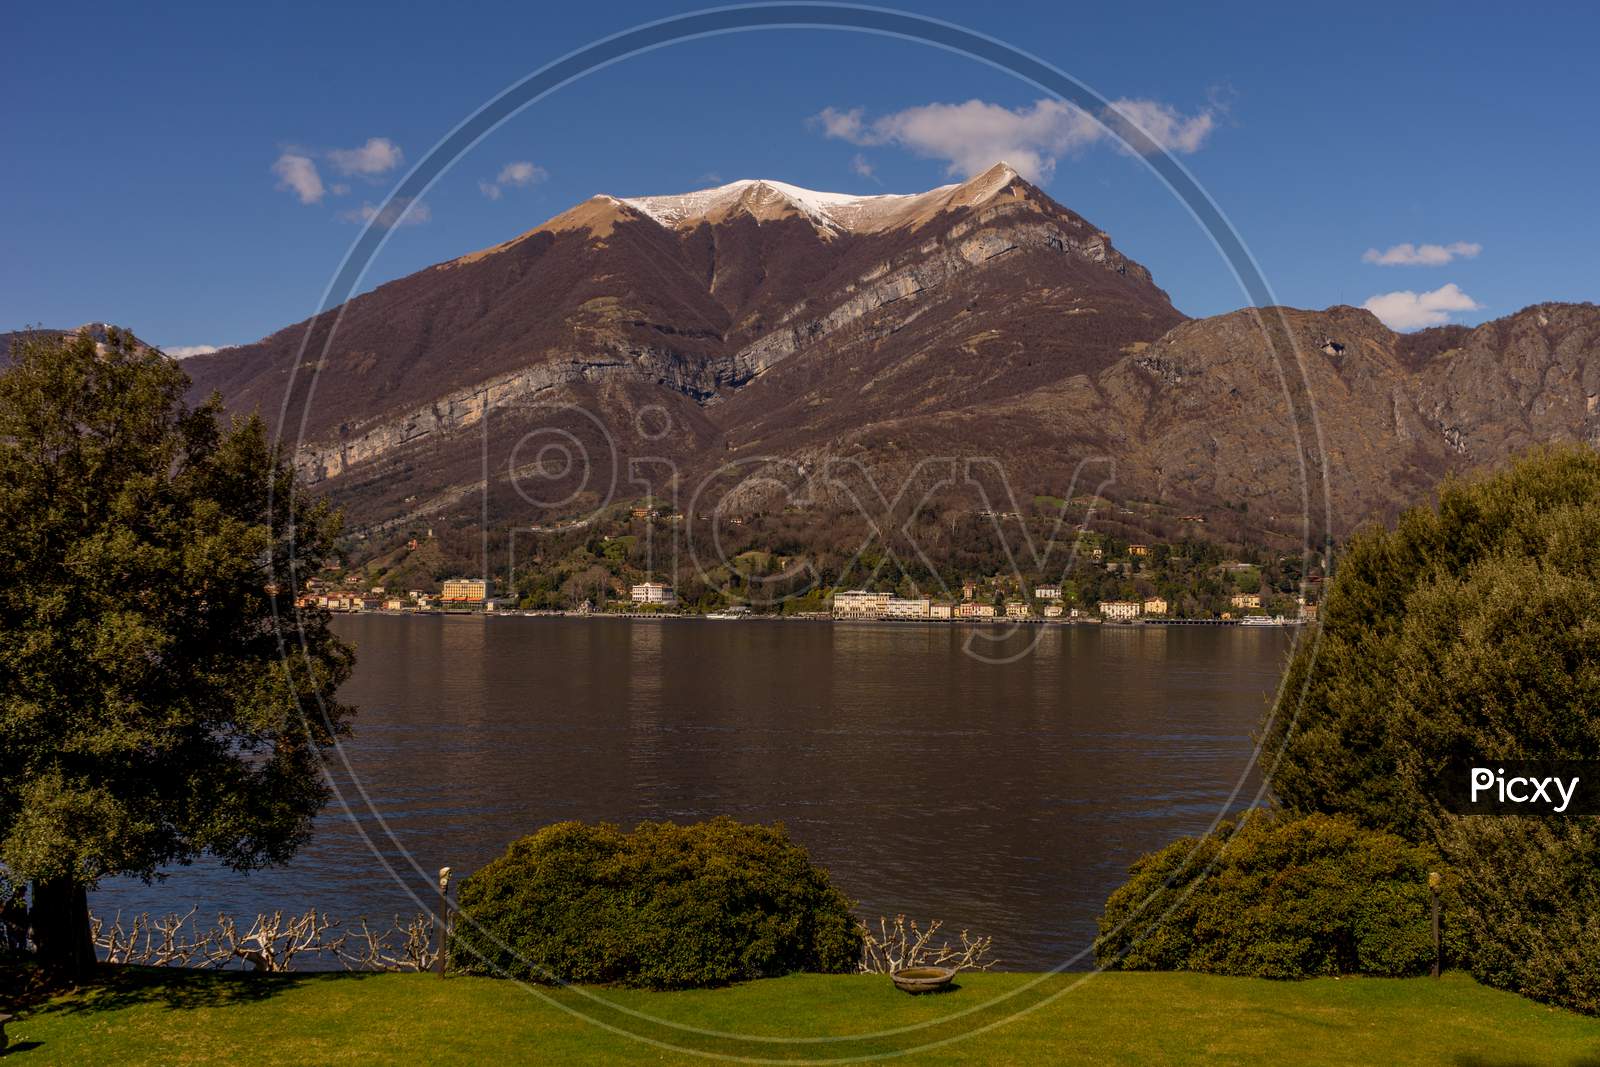 Italy, Bellagio, Lake Como, Scenic View Of Snowcapped Mountains Against Blue Sky, Lombardy